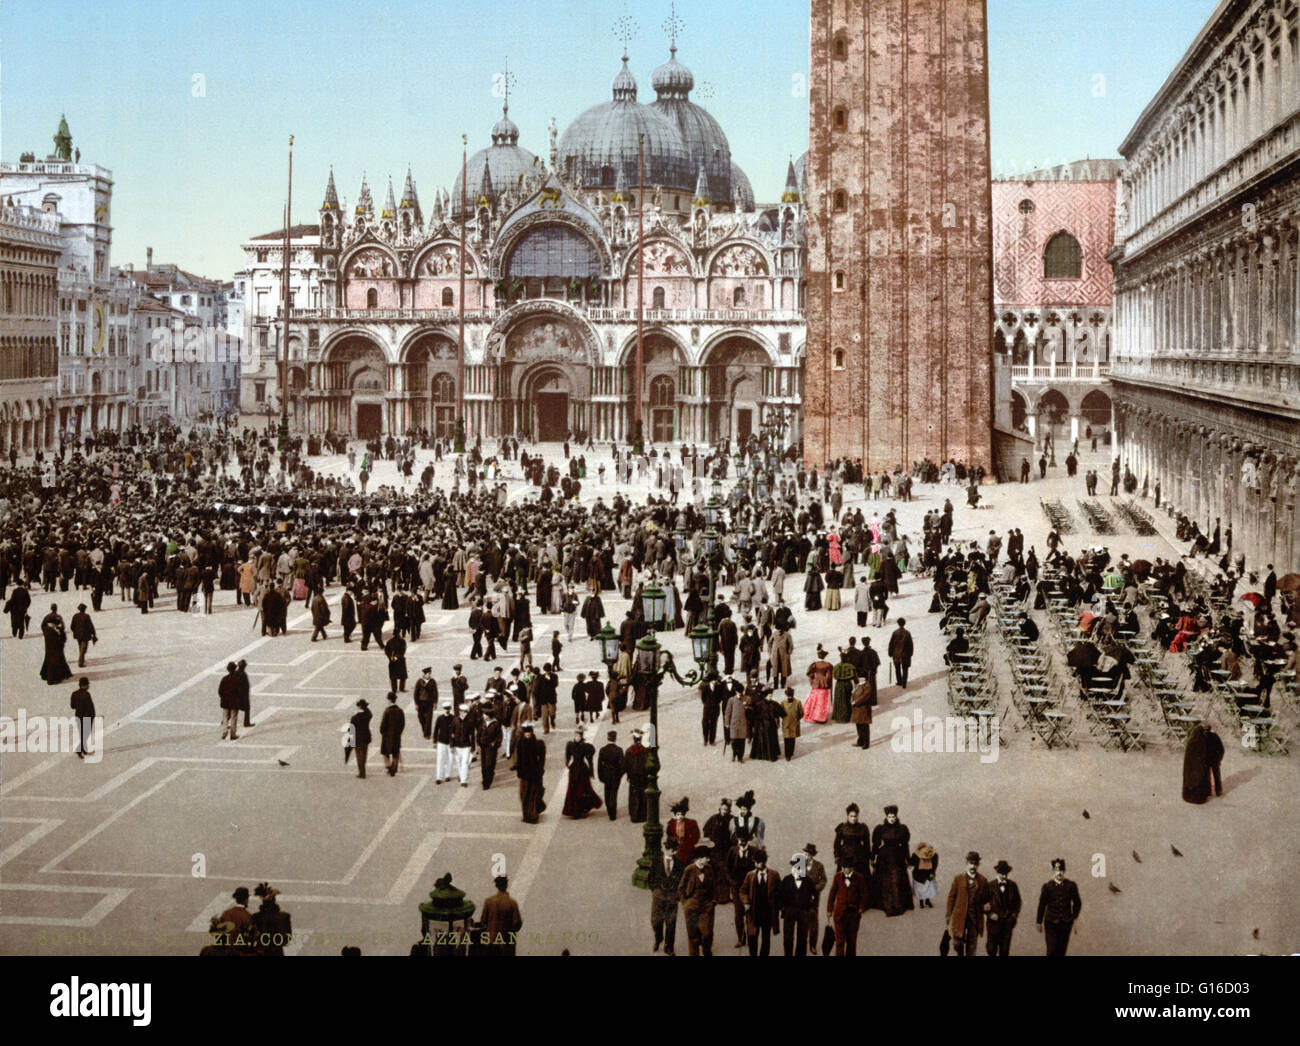 Piazza San Marco is the principal public square of Venice, Italy, where it is generally known just as 'the Piazza'. The Piazzetta ('little Piazza') is an extension of the Piazza towards the lagoon in its south east corner. The two spaces together form the Stock Photo